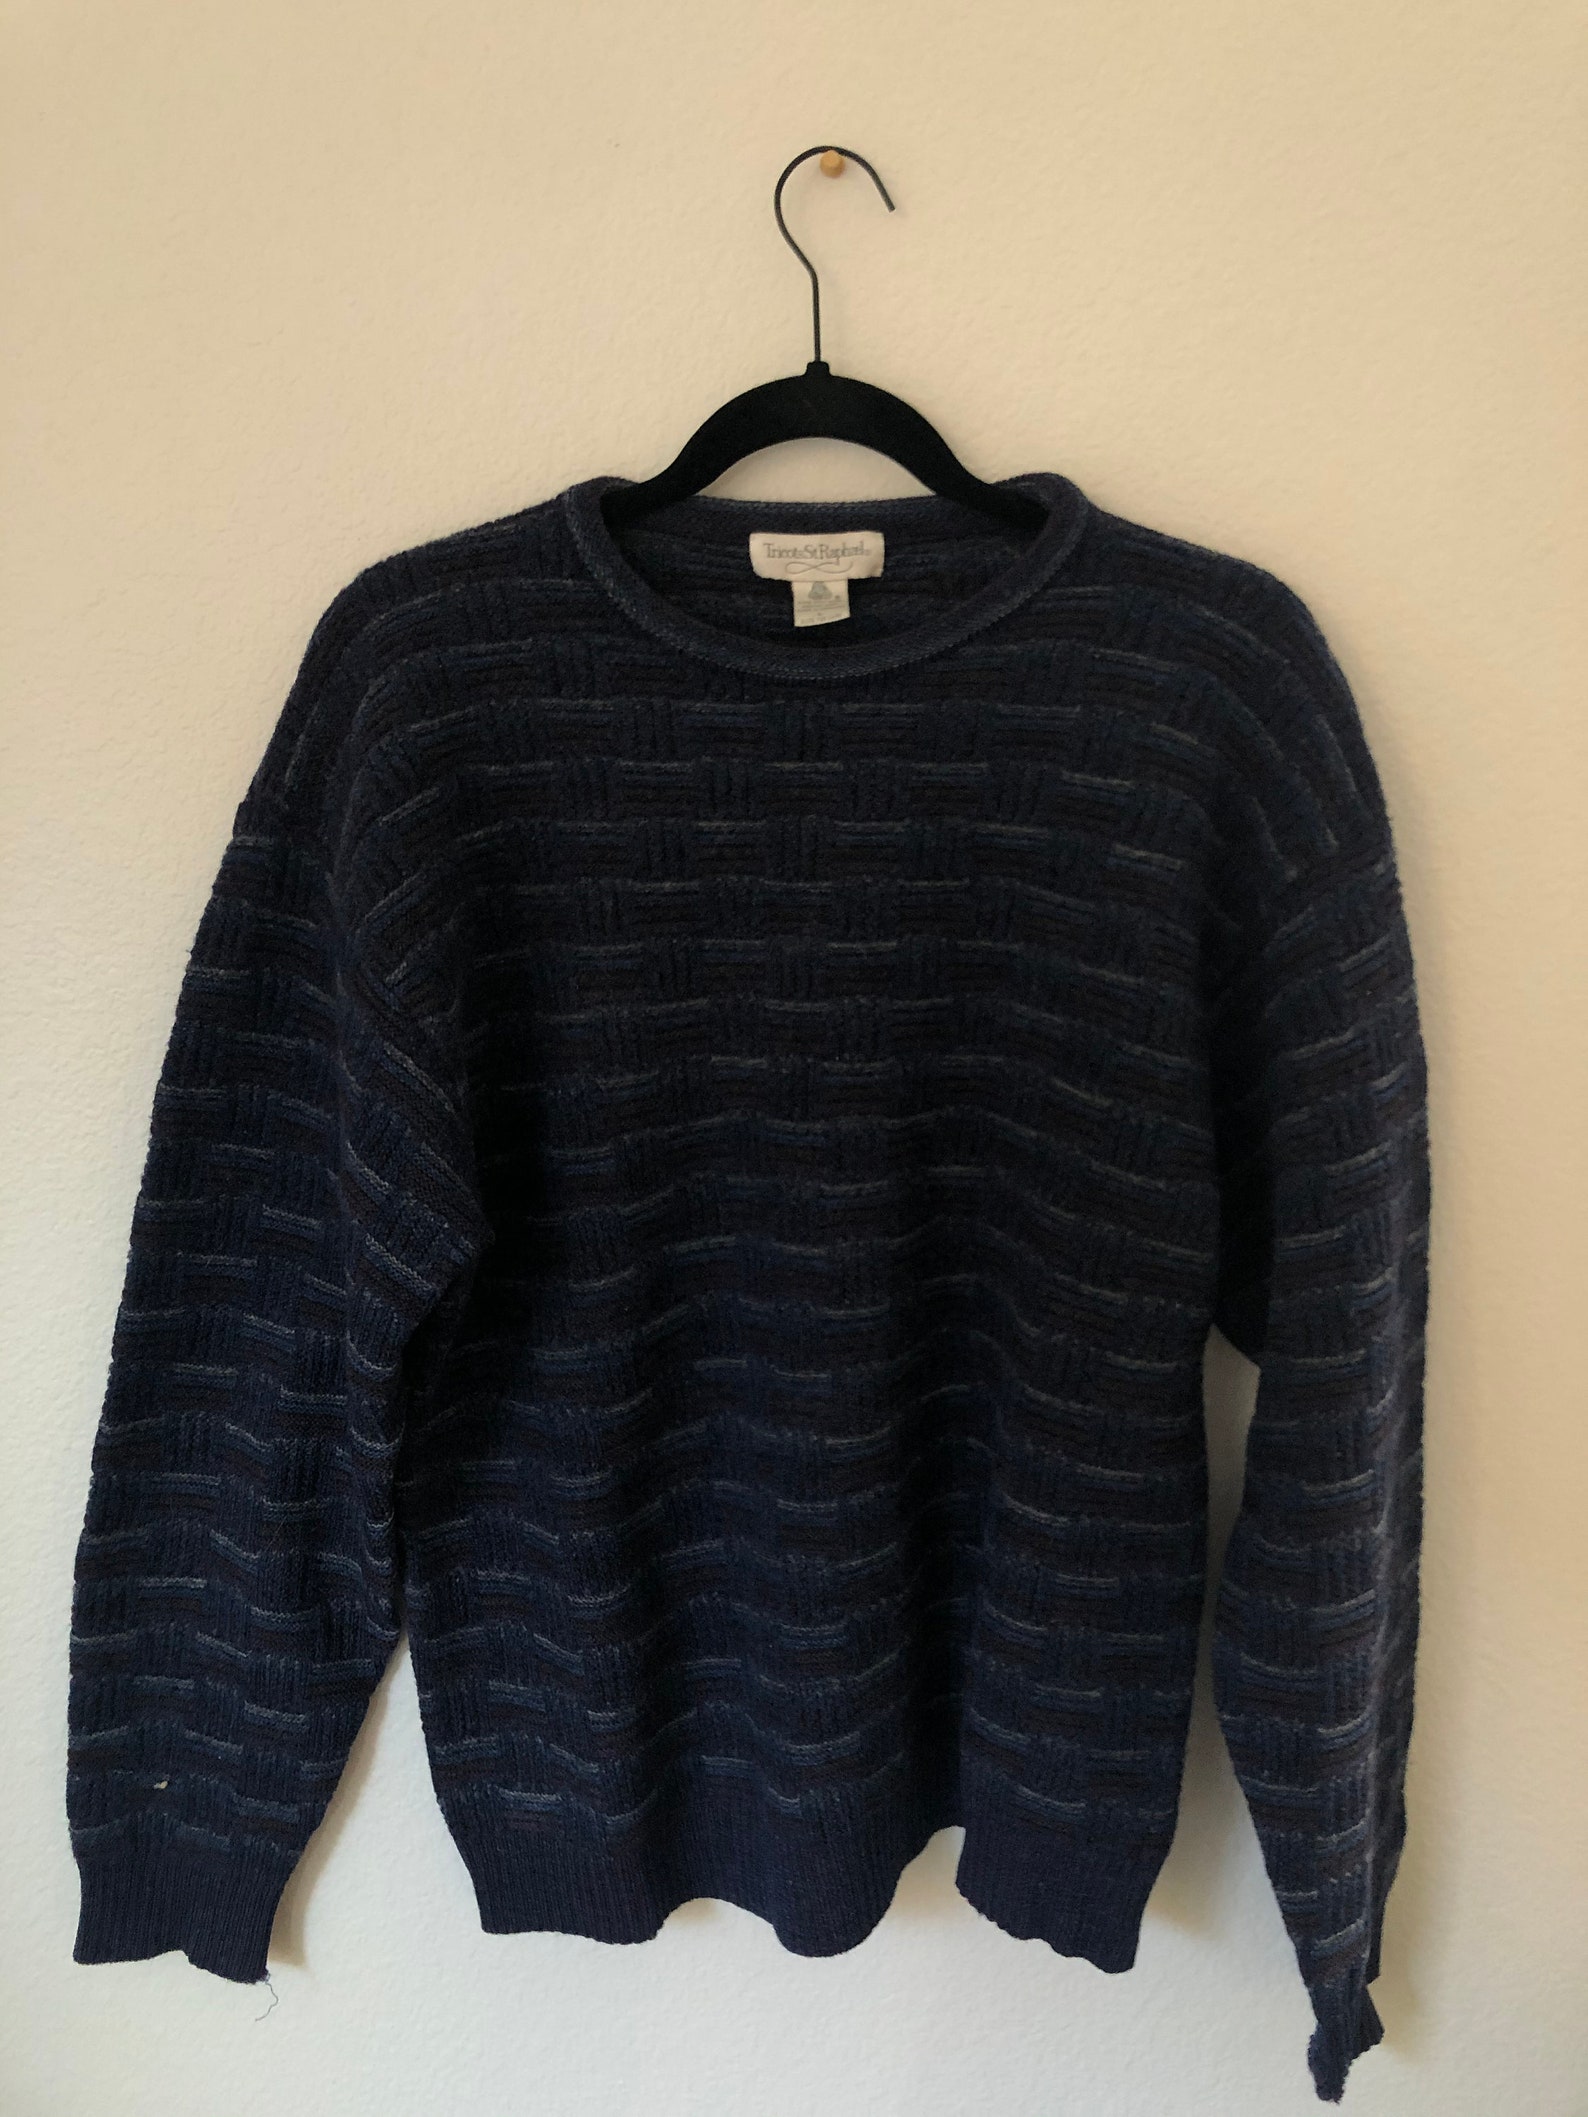 Vintage Wool Sweater From Uruguay - Etsy